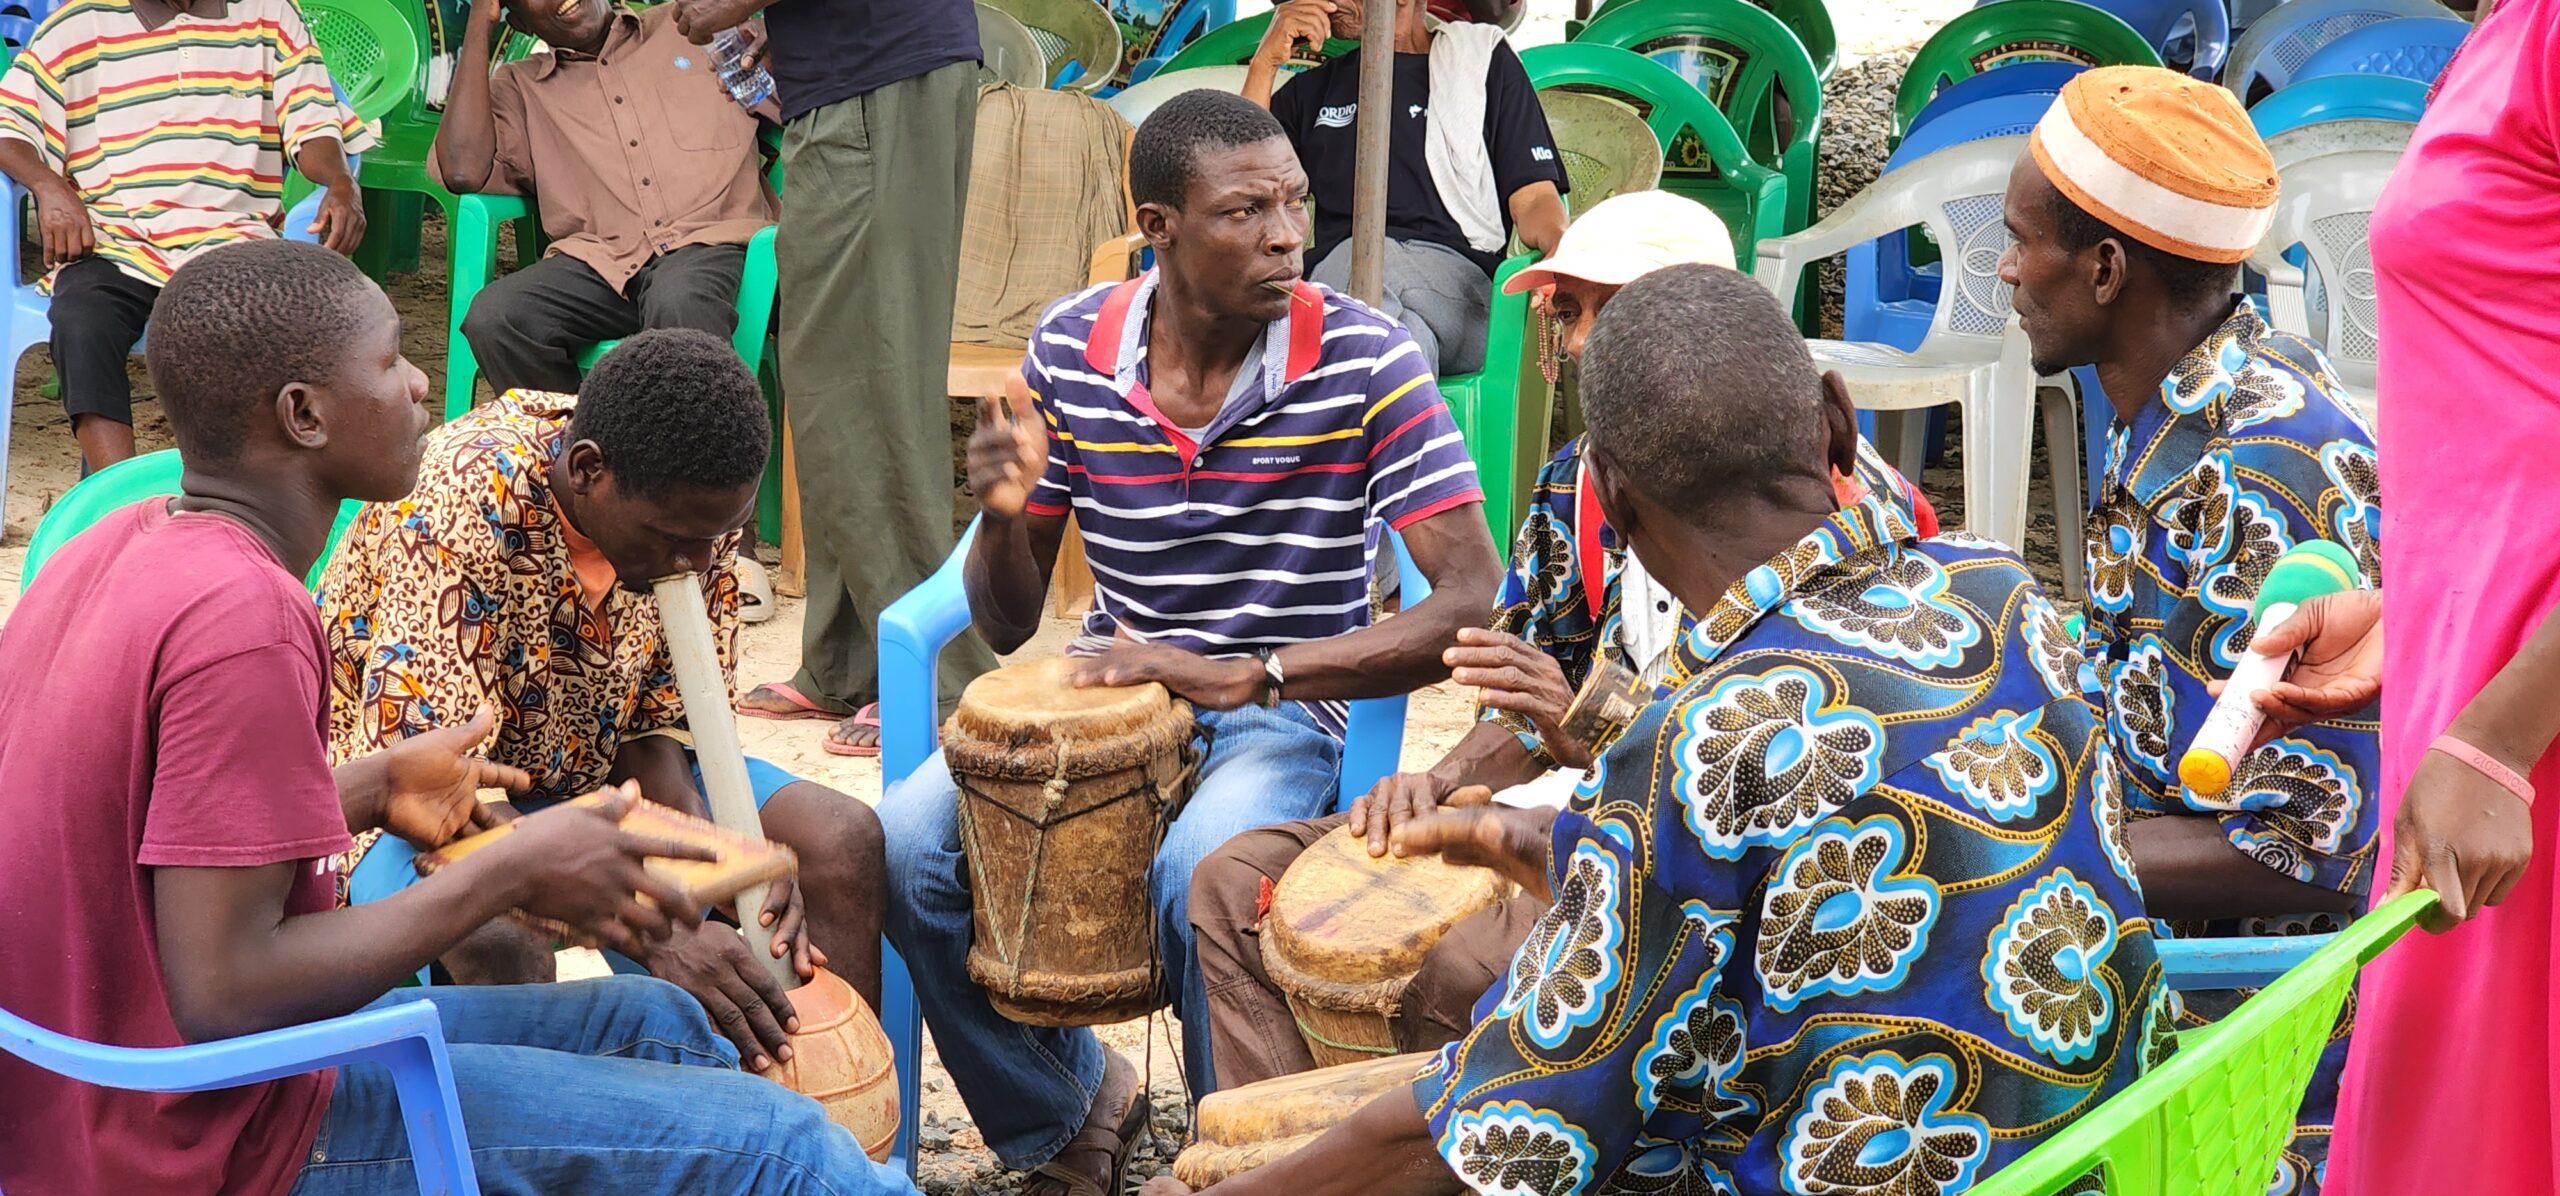 A band entertains attendees